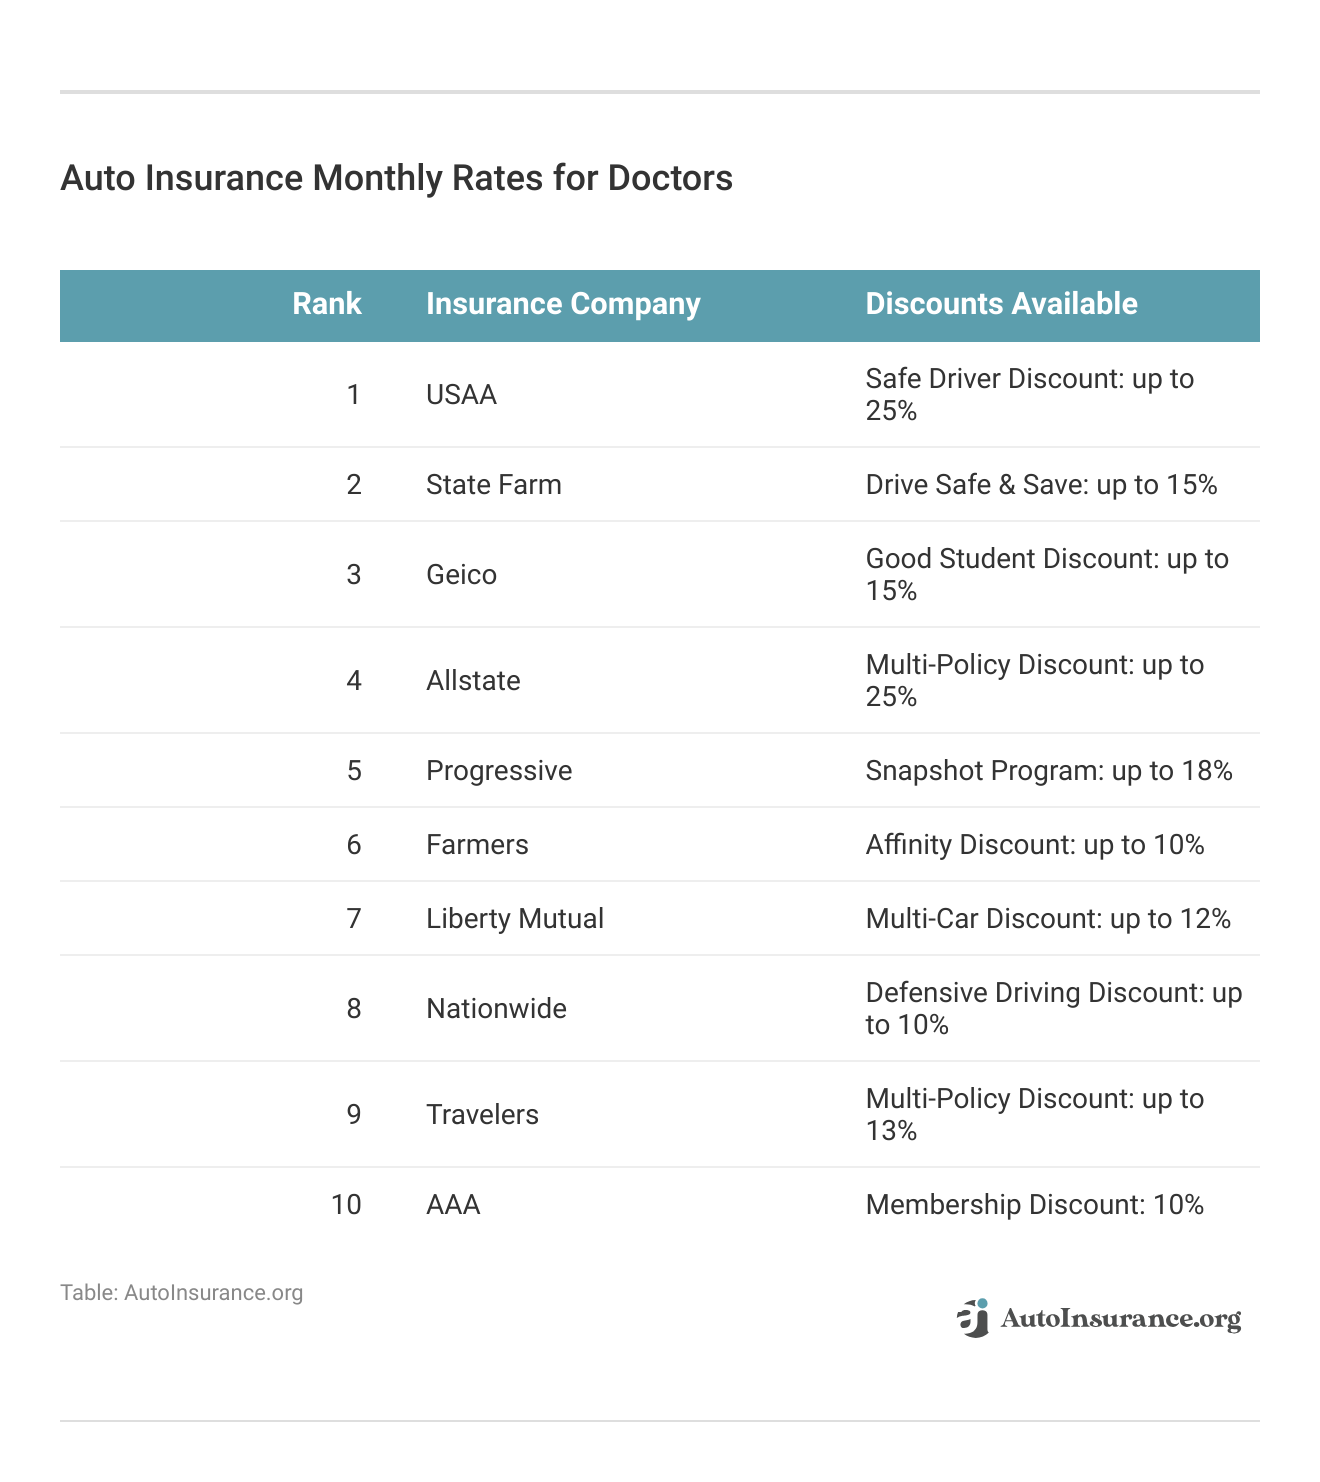 <h3>Auto Insurance Monthly Rates for Doctors</h3>